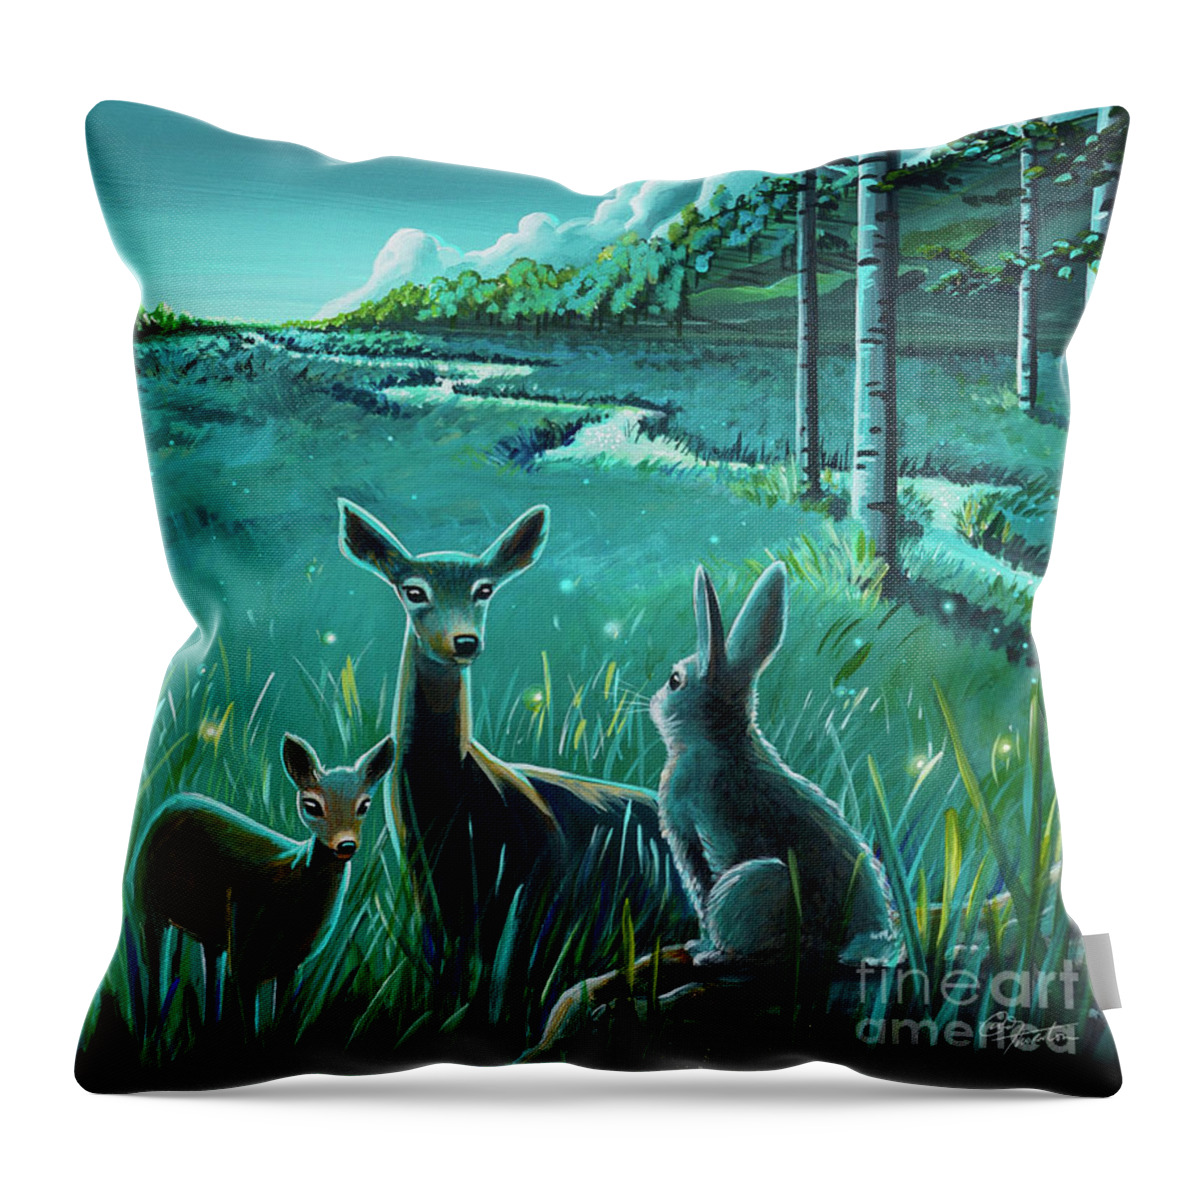 Night Throw Pillow featuring the painting One Night In The Meadow by Cindy Thornton